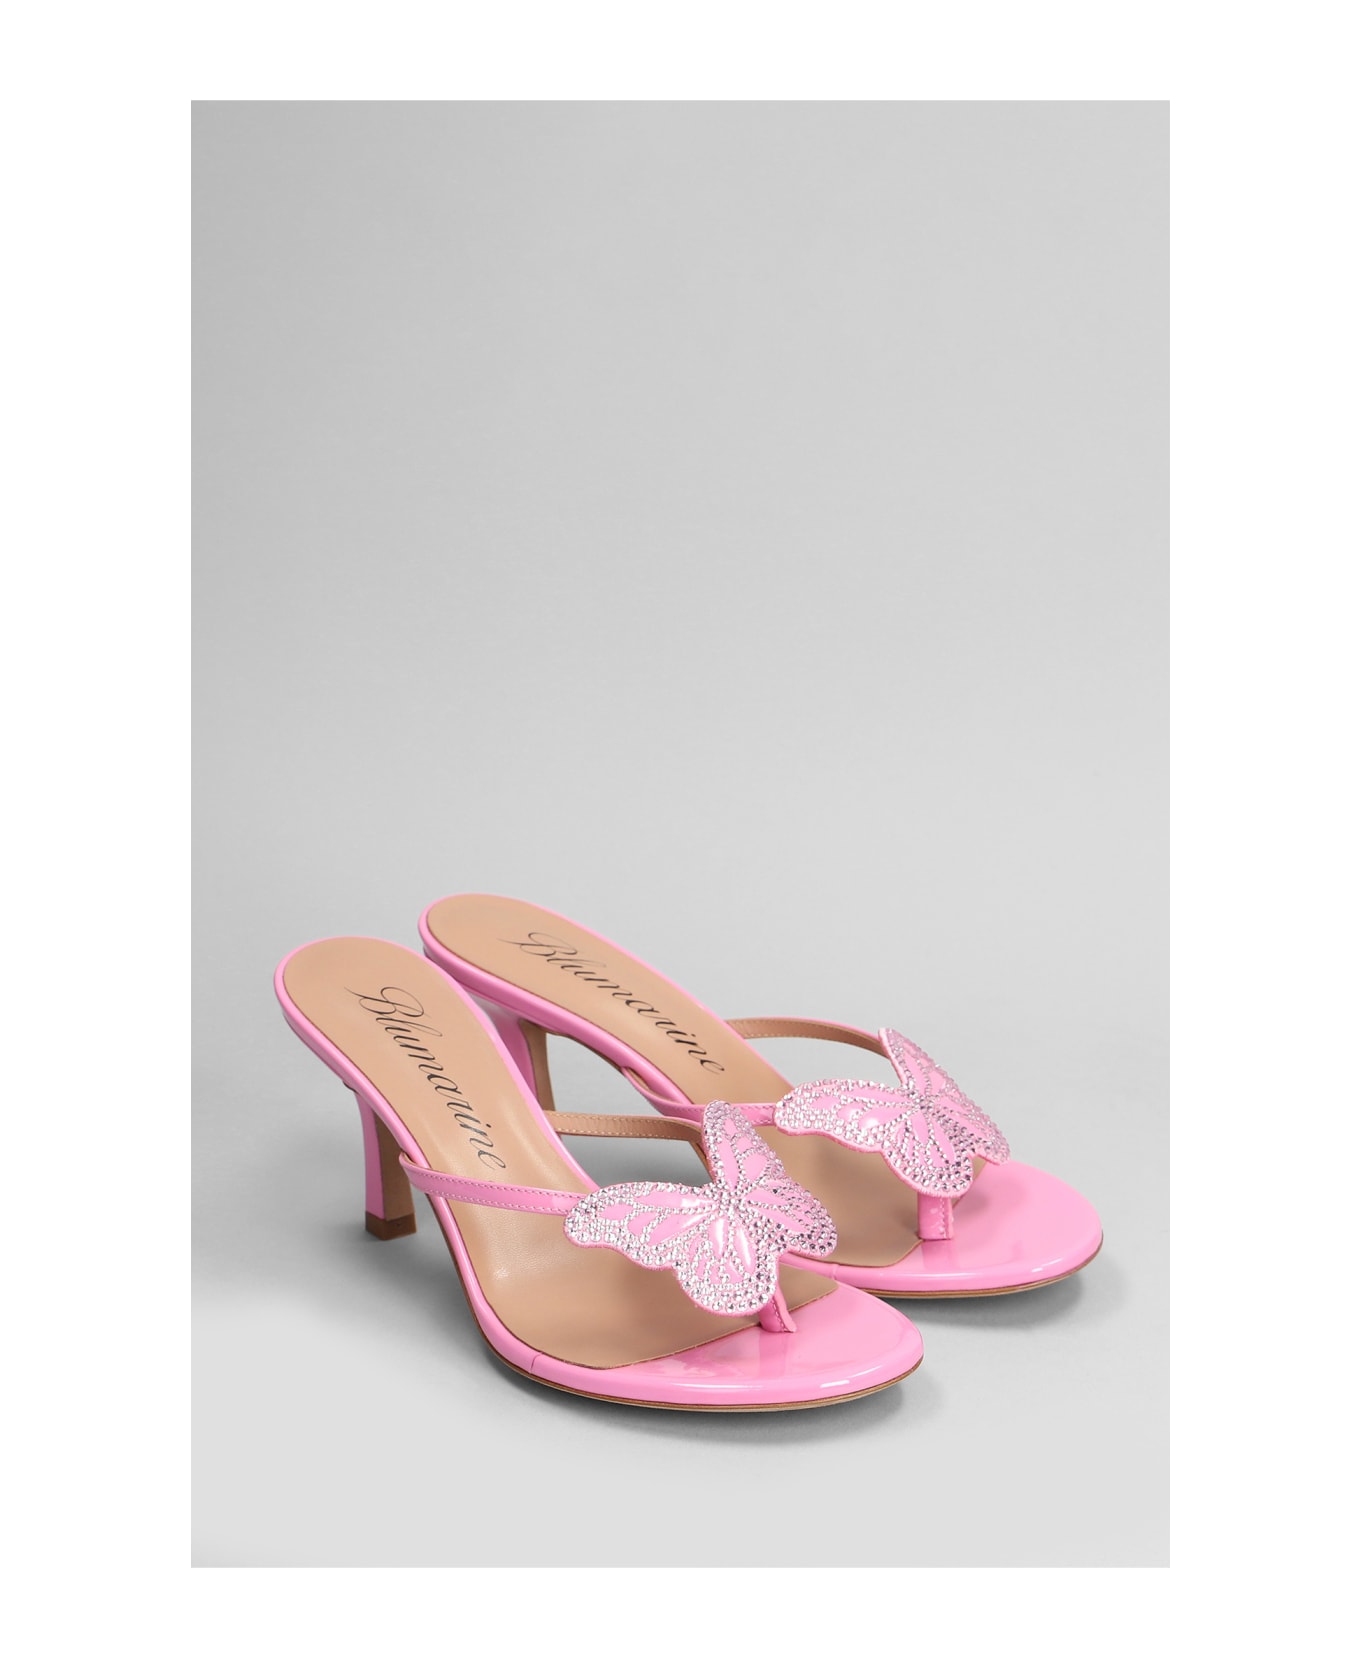 Blumarine Butterfly Slipper-mule In Rose-pink Patent Leather - rose-pink サンダル